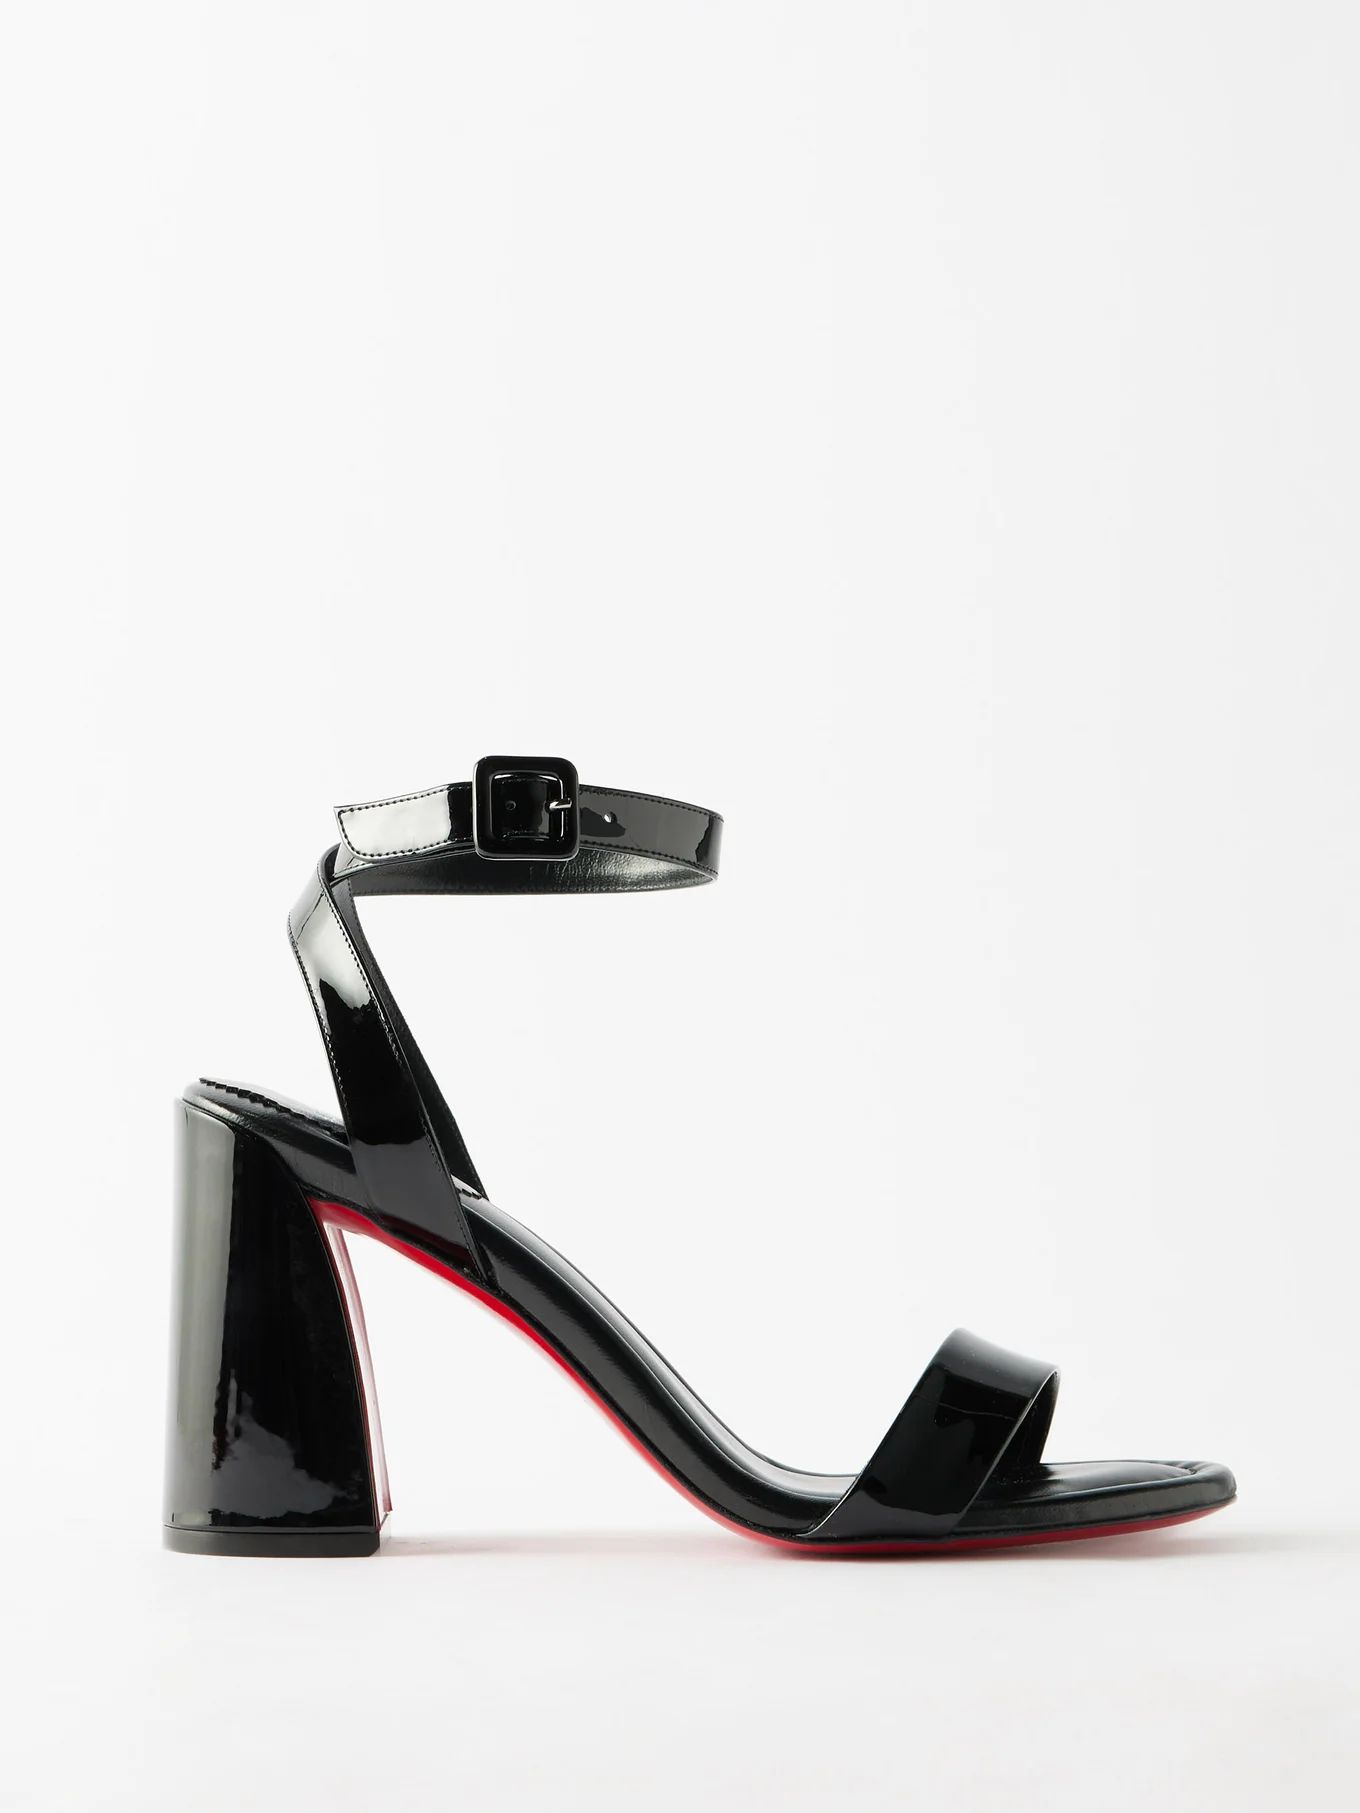 Miss Sabina 85 patent-leather sandals | Christian Louboutin | Matches (APAC)